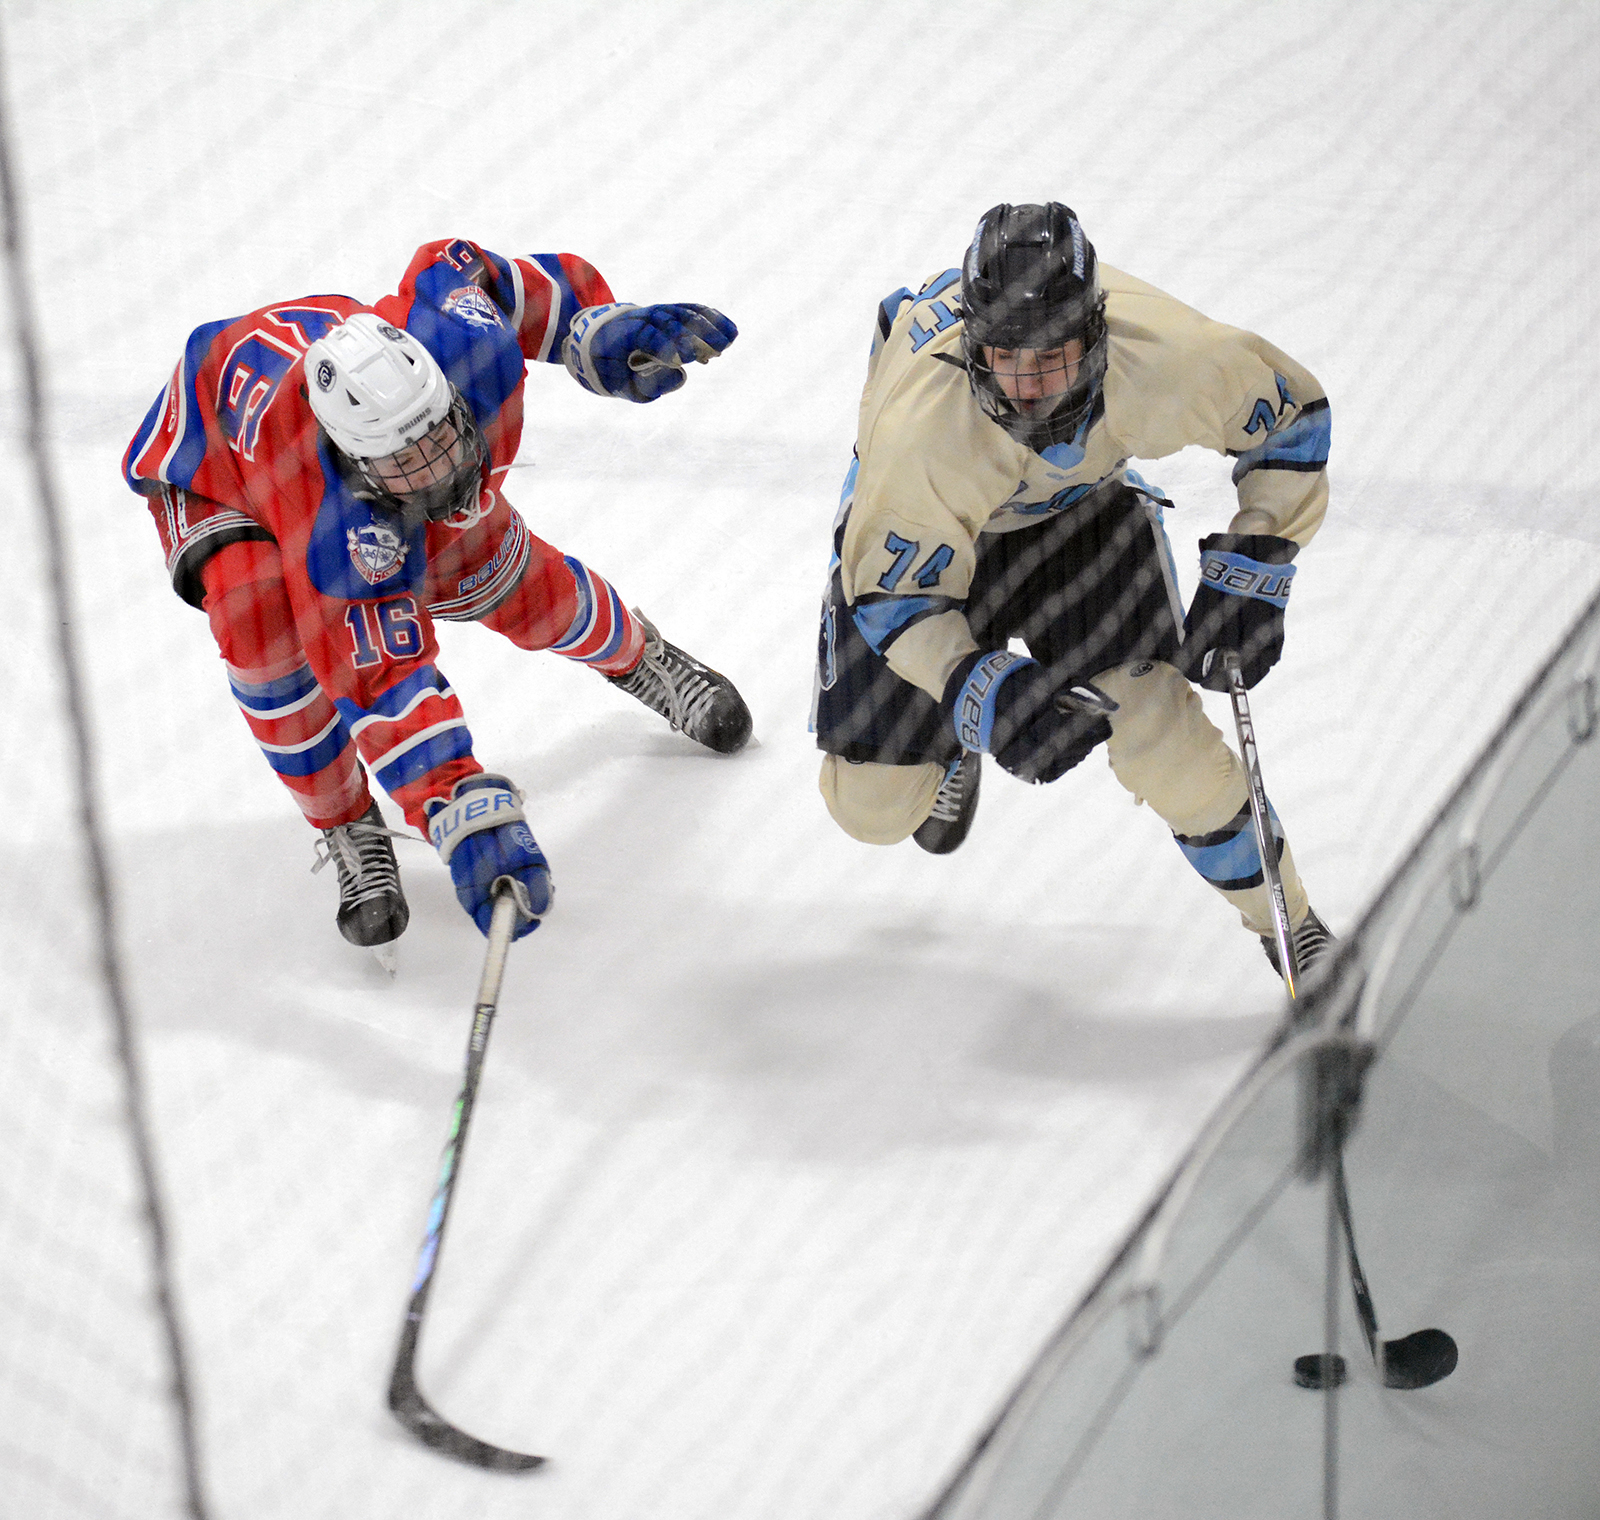 Cherry Creek Hockey Dominates with 5-2 Victory Over Ralston Valley